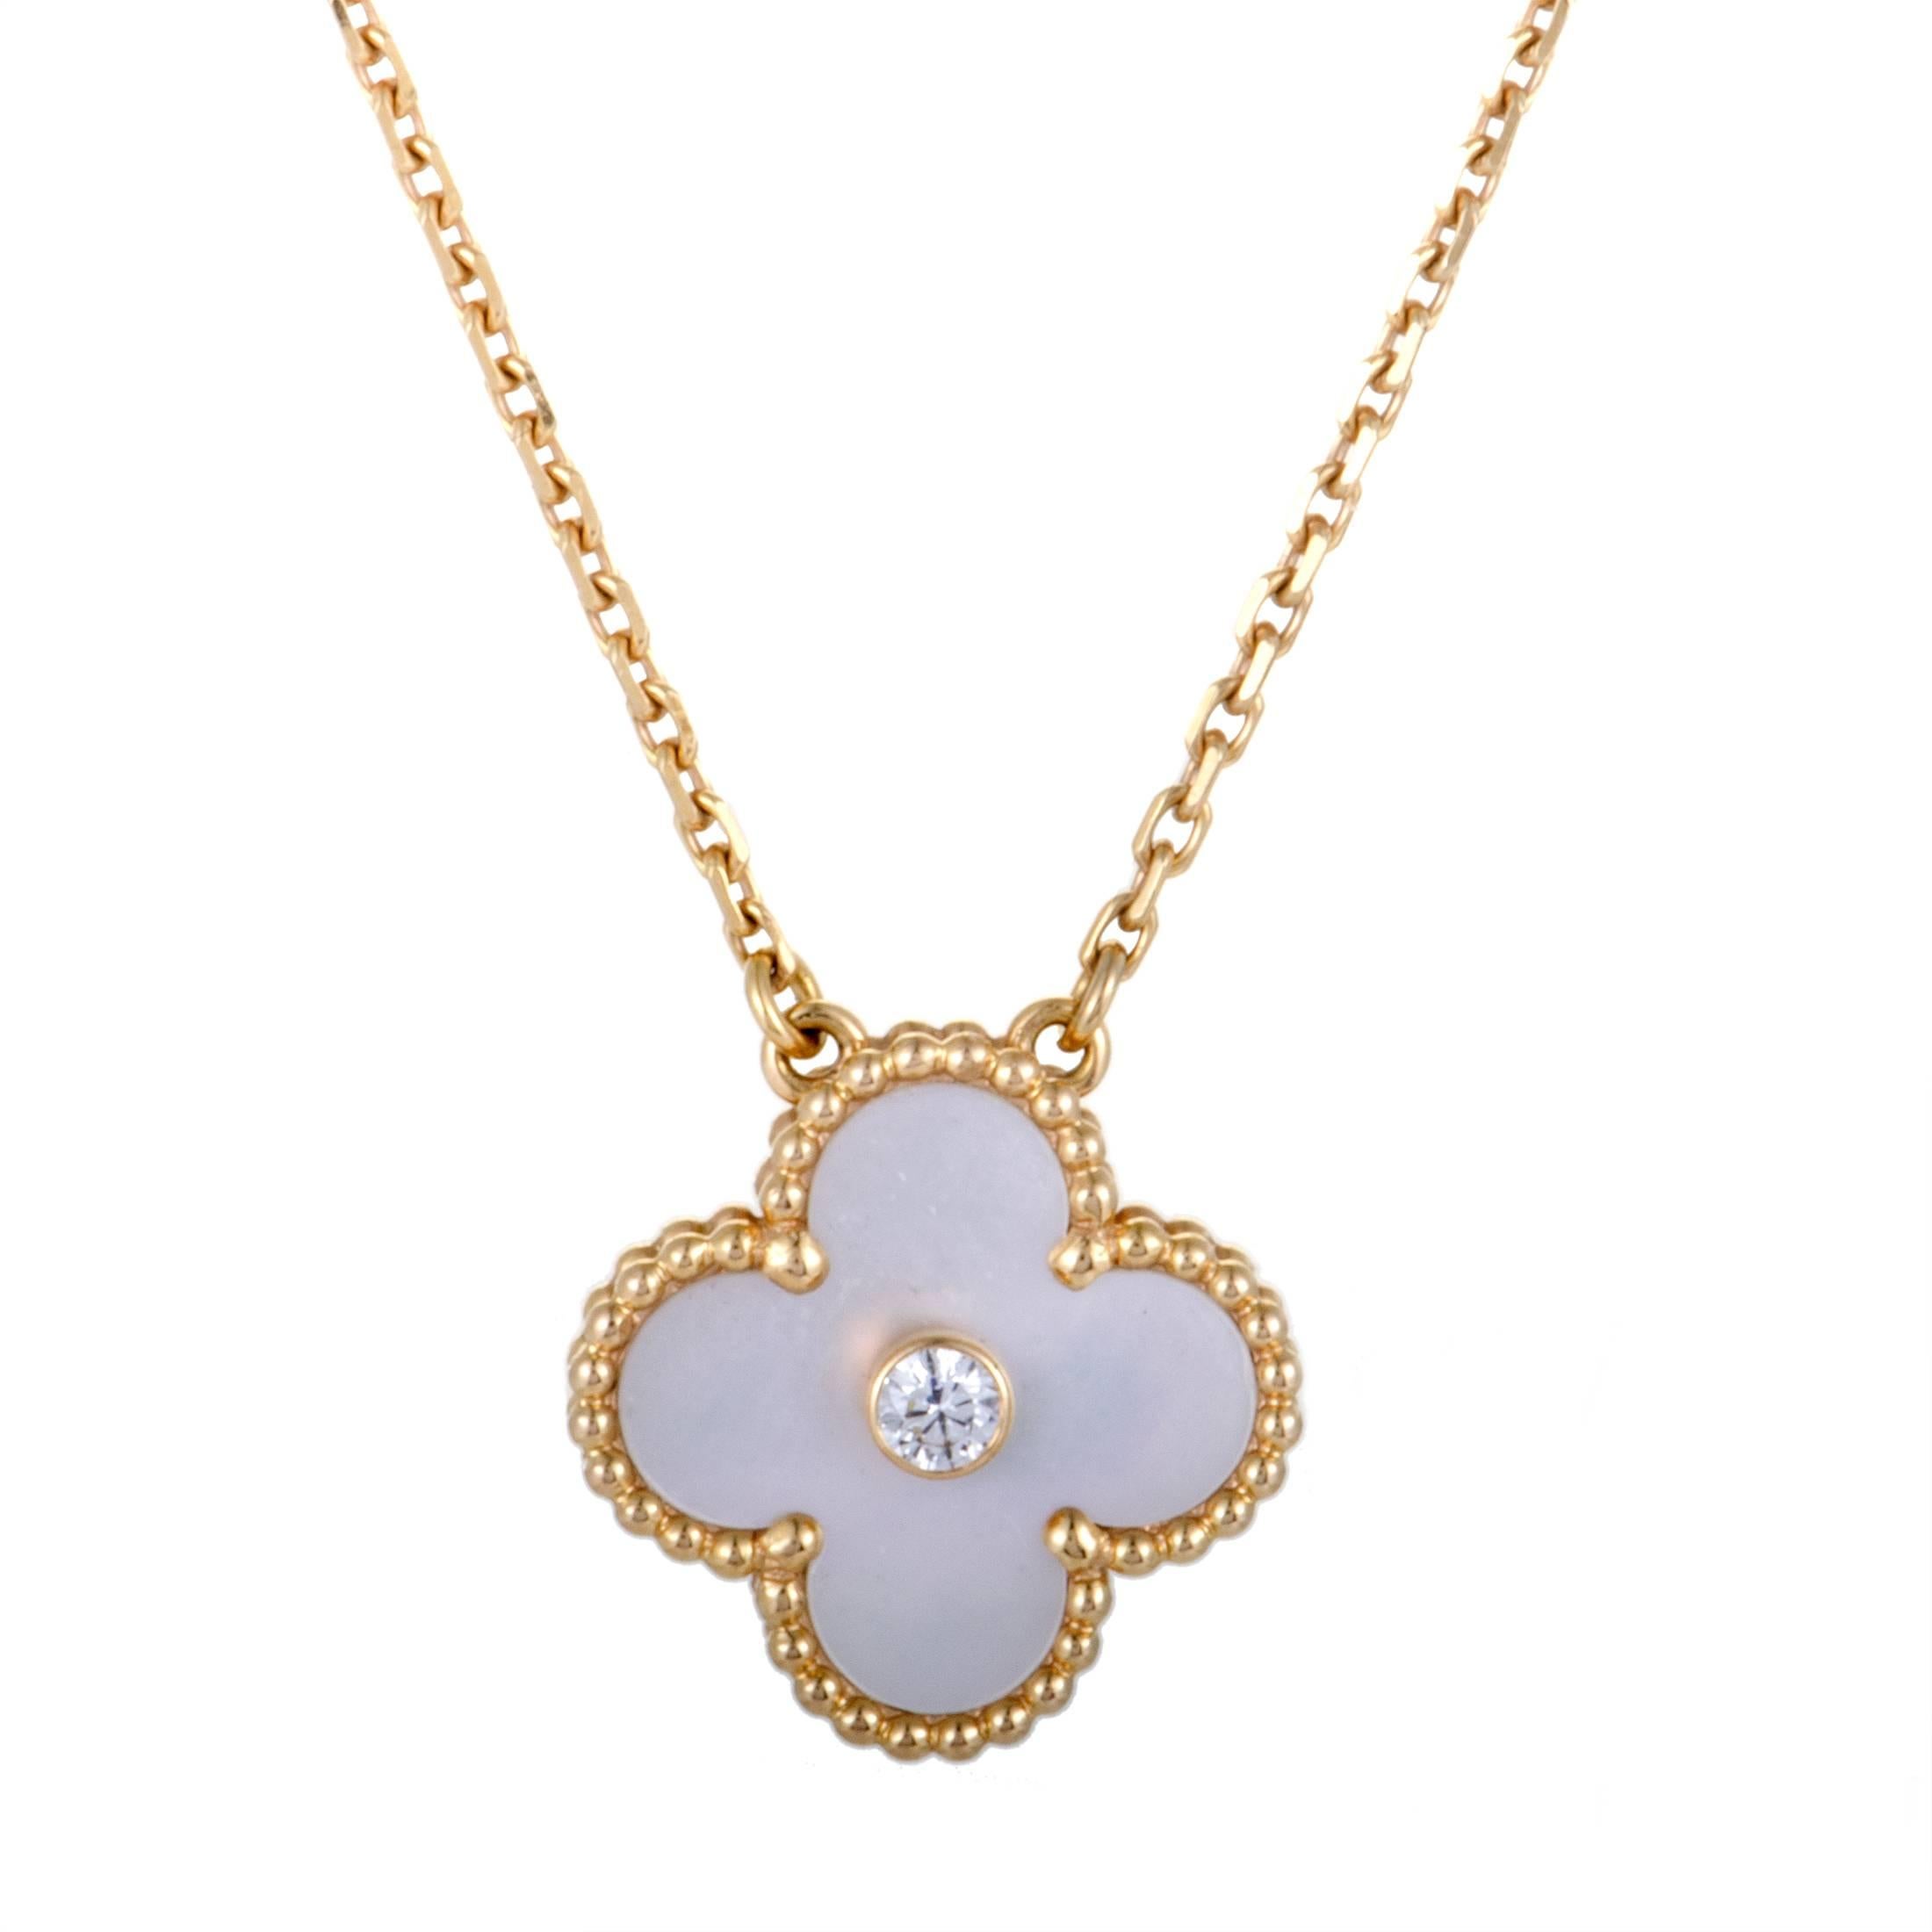 Van Cleef & Arpels Alhambra Diamond and Mother-of-Pearl Gold Pendant Necklace